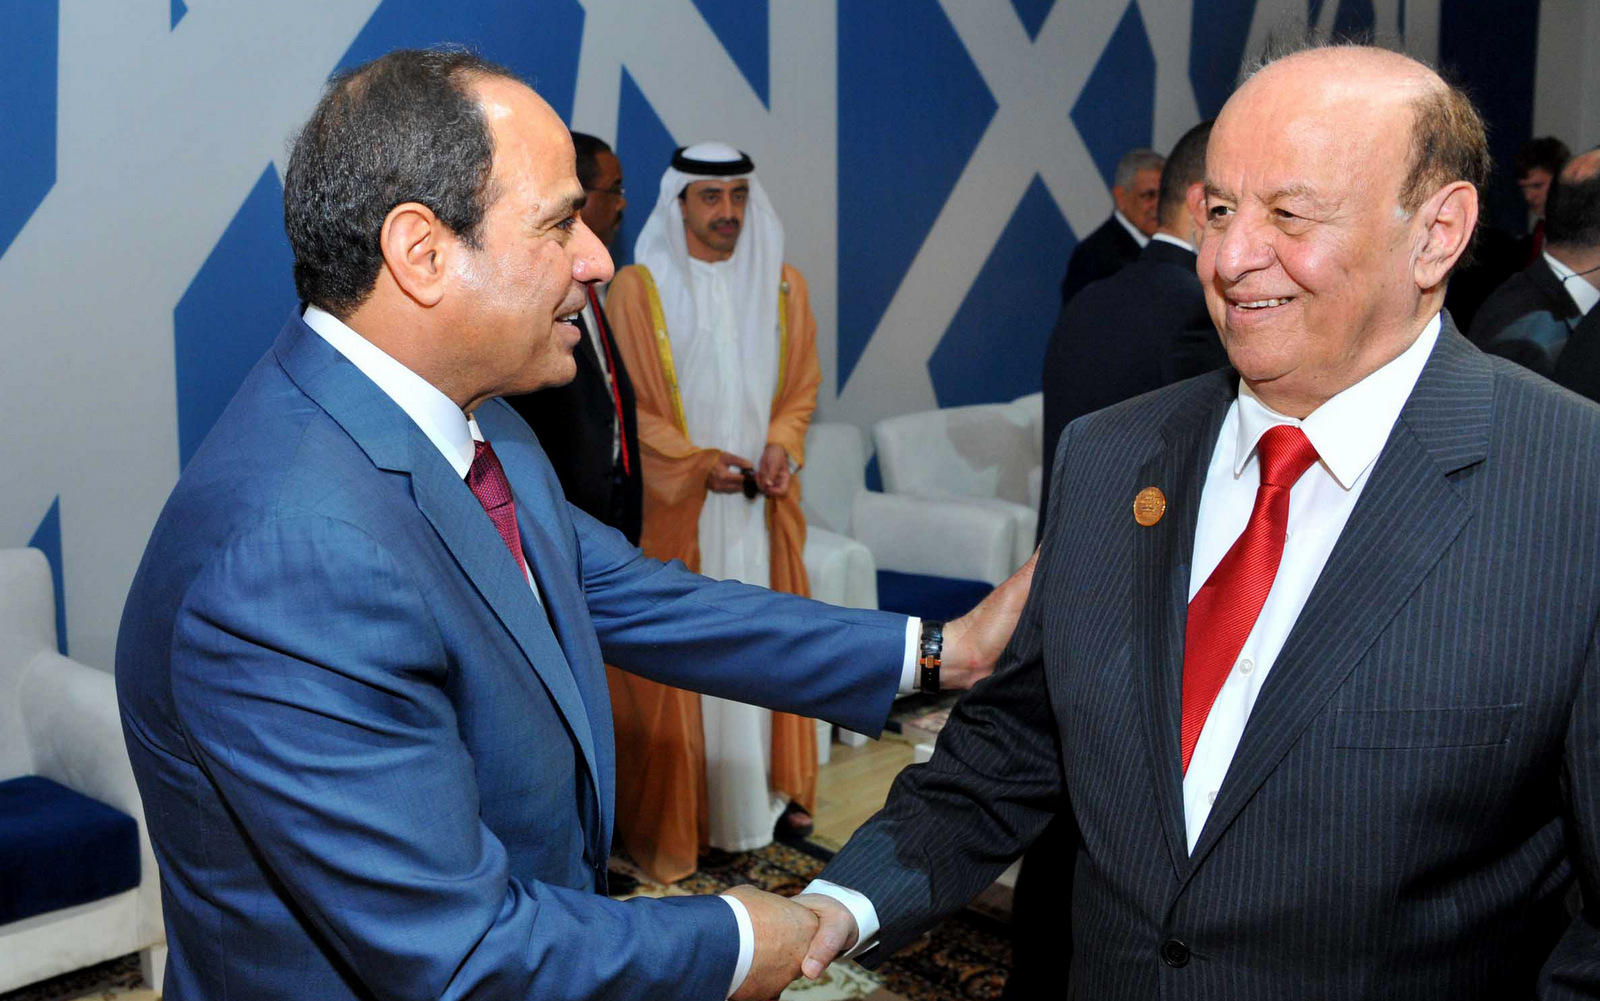 In this picture provided by the office of the Egyptian Presidency, Egyptian President Abdel-Fattah el-Sissi, left, talks to Yemen's exiled President Abed Rabbo Mansour Hadi following a ceremony unveiling a major extension of the Suez Canal in Ismailia, Egypt,, Aug. 6, 2015. (Egyptian Presidency via AP)